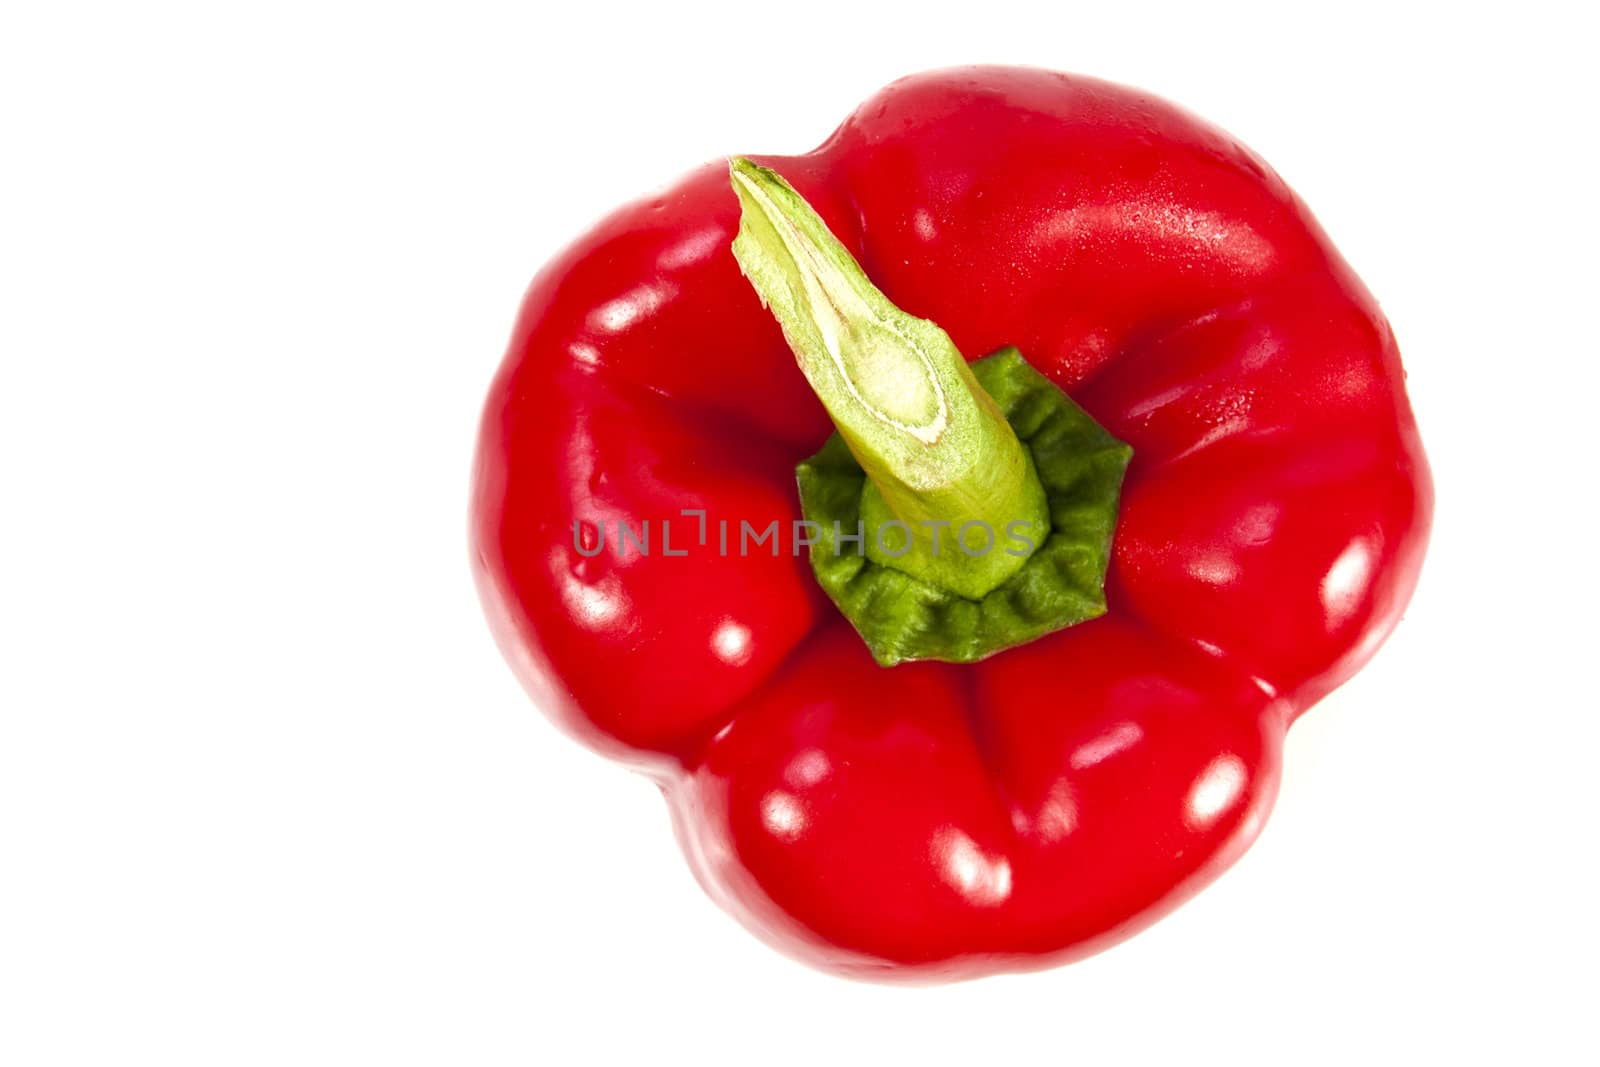 Top view of red bell pepper on white background